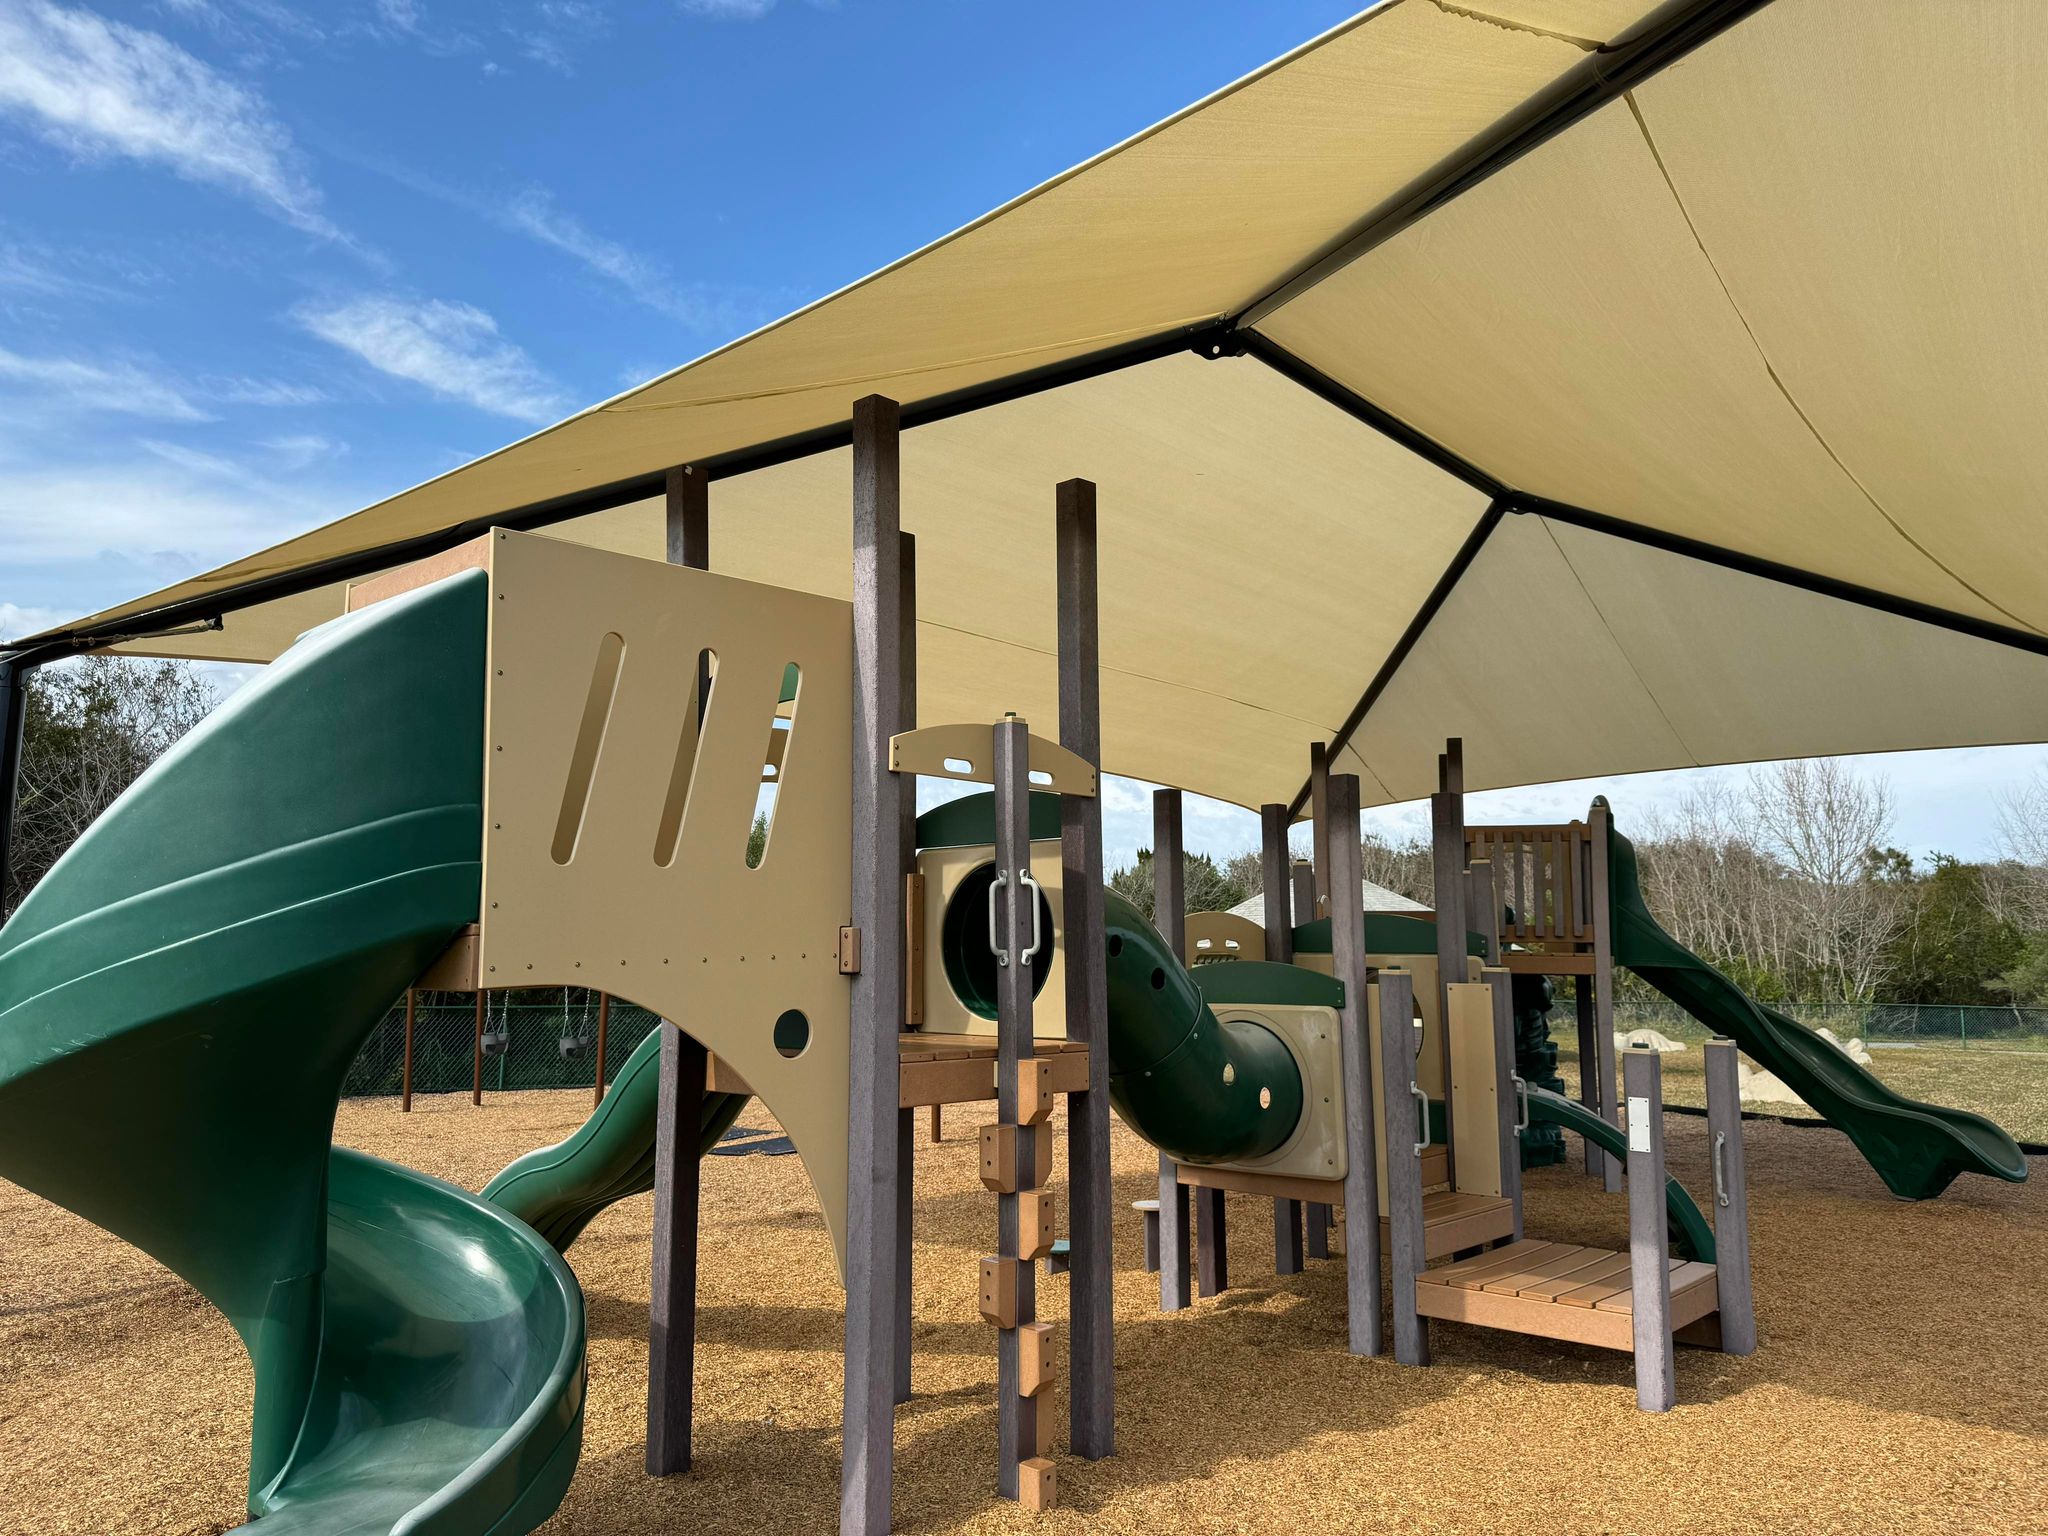 A playground structure with a slide underneath a canvas shade structure.